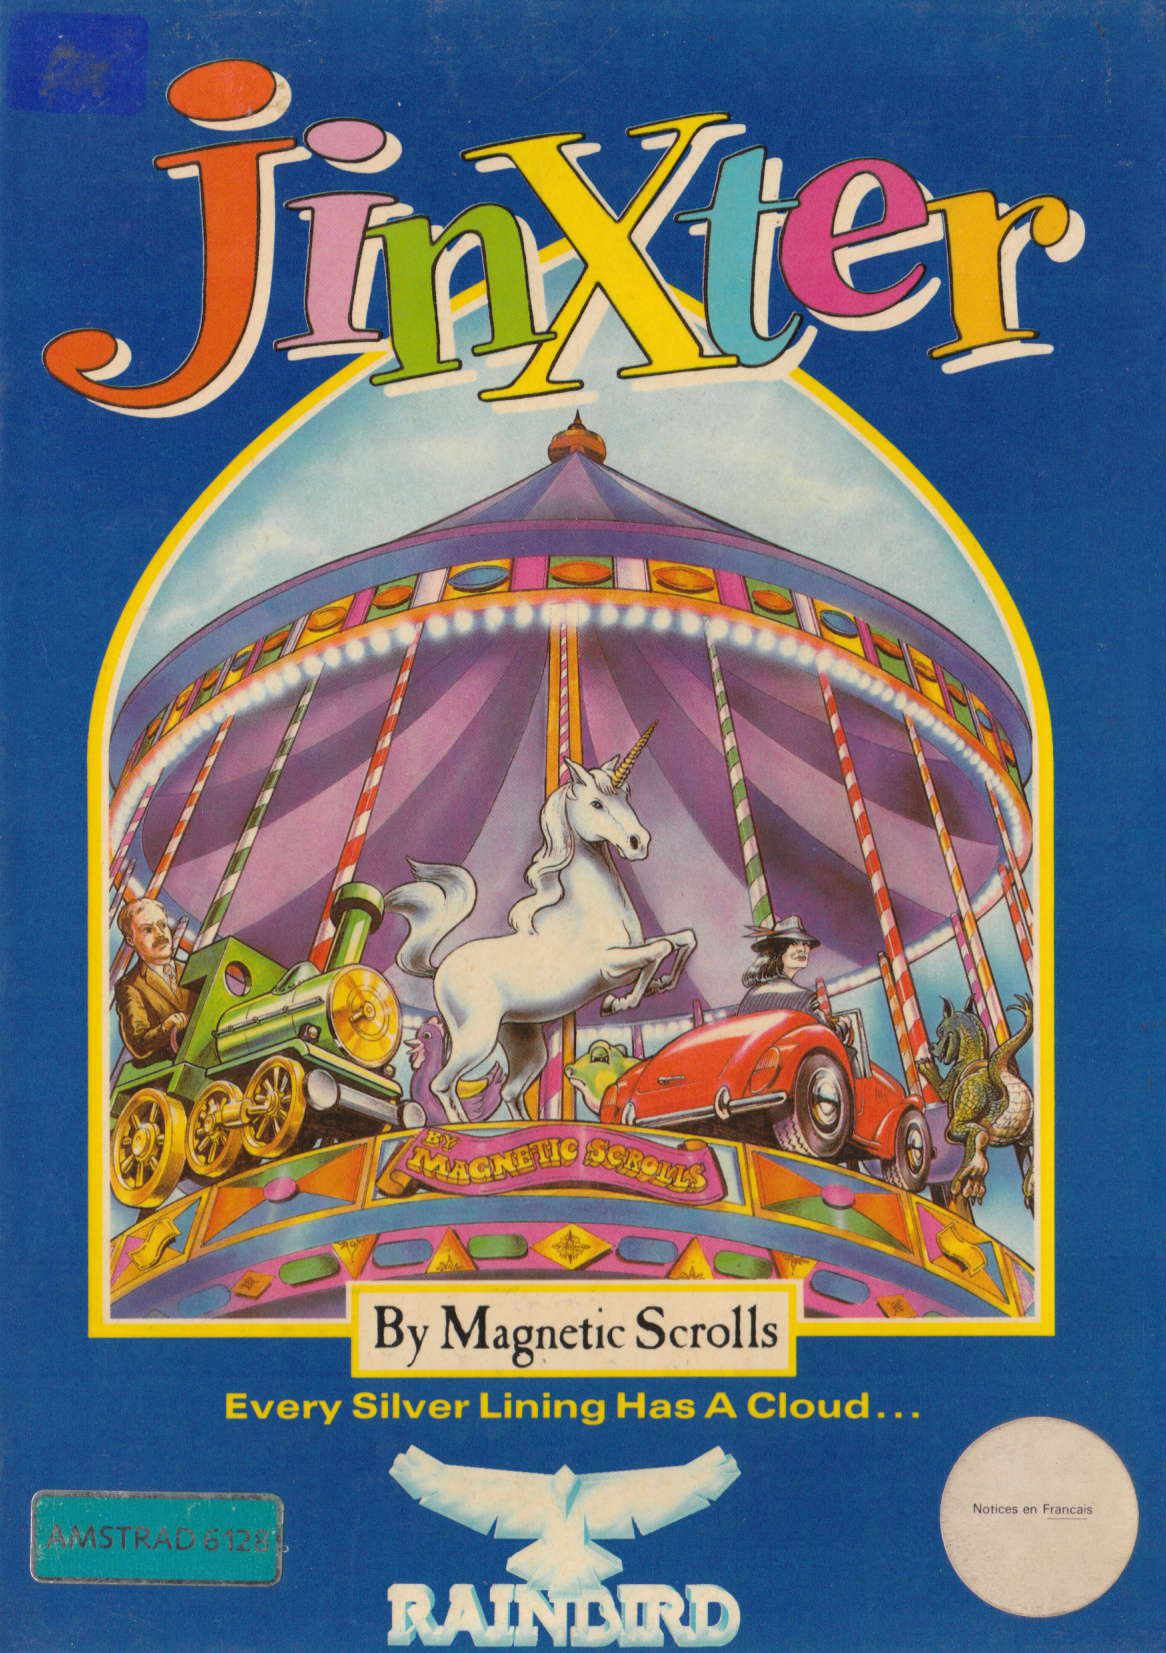 cover of the Amstrad CPC game Jinxter  by GameBase CPC